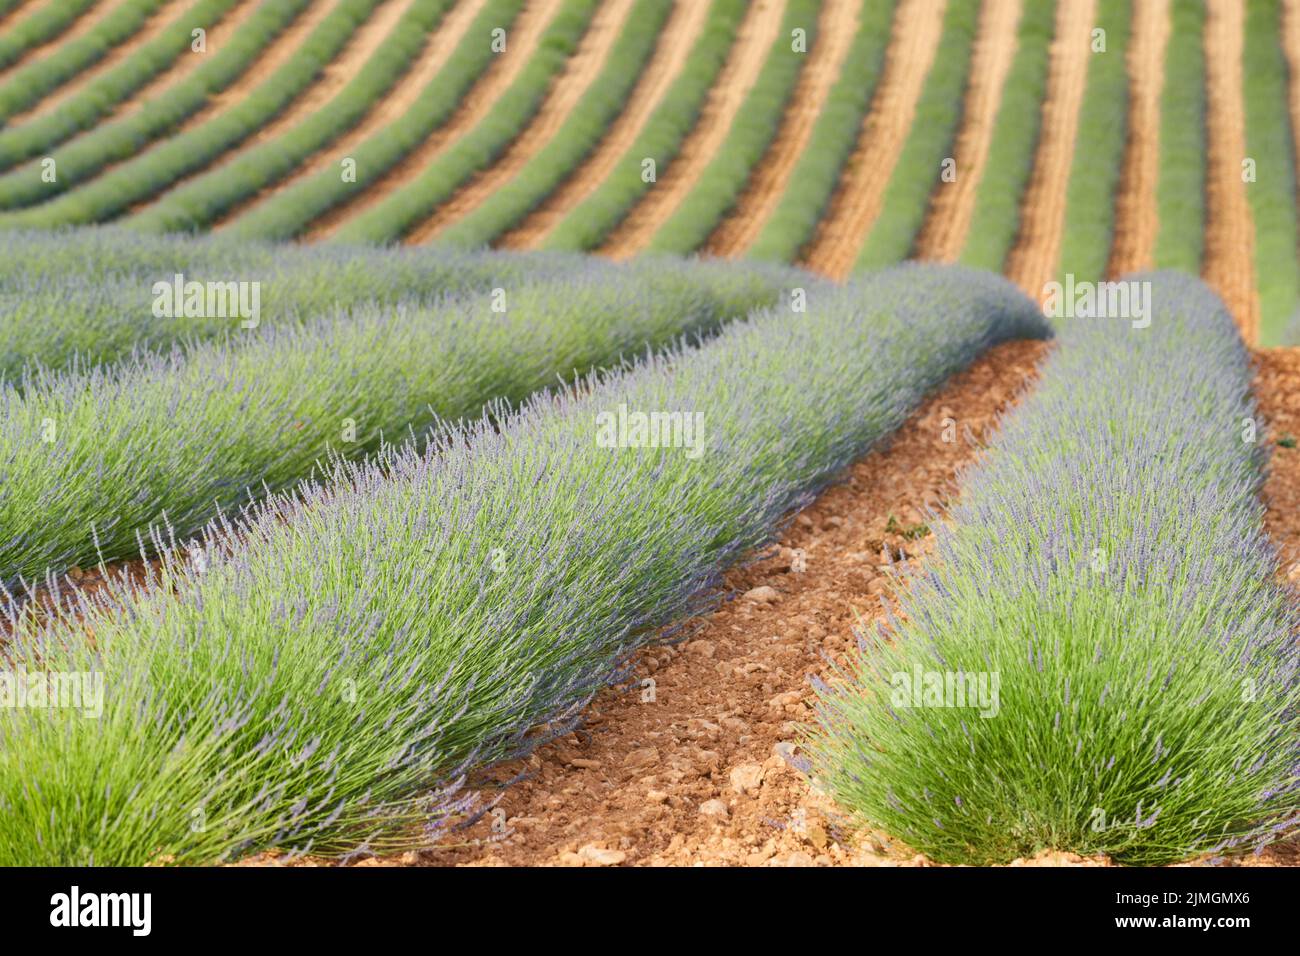 Huge Field of rows of lavender in France, Valensole, Cote Dazur-Alps-Provence, purple flowers, green stems, combed beds with per Stock Photo